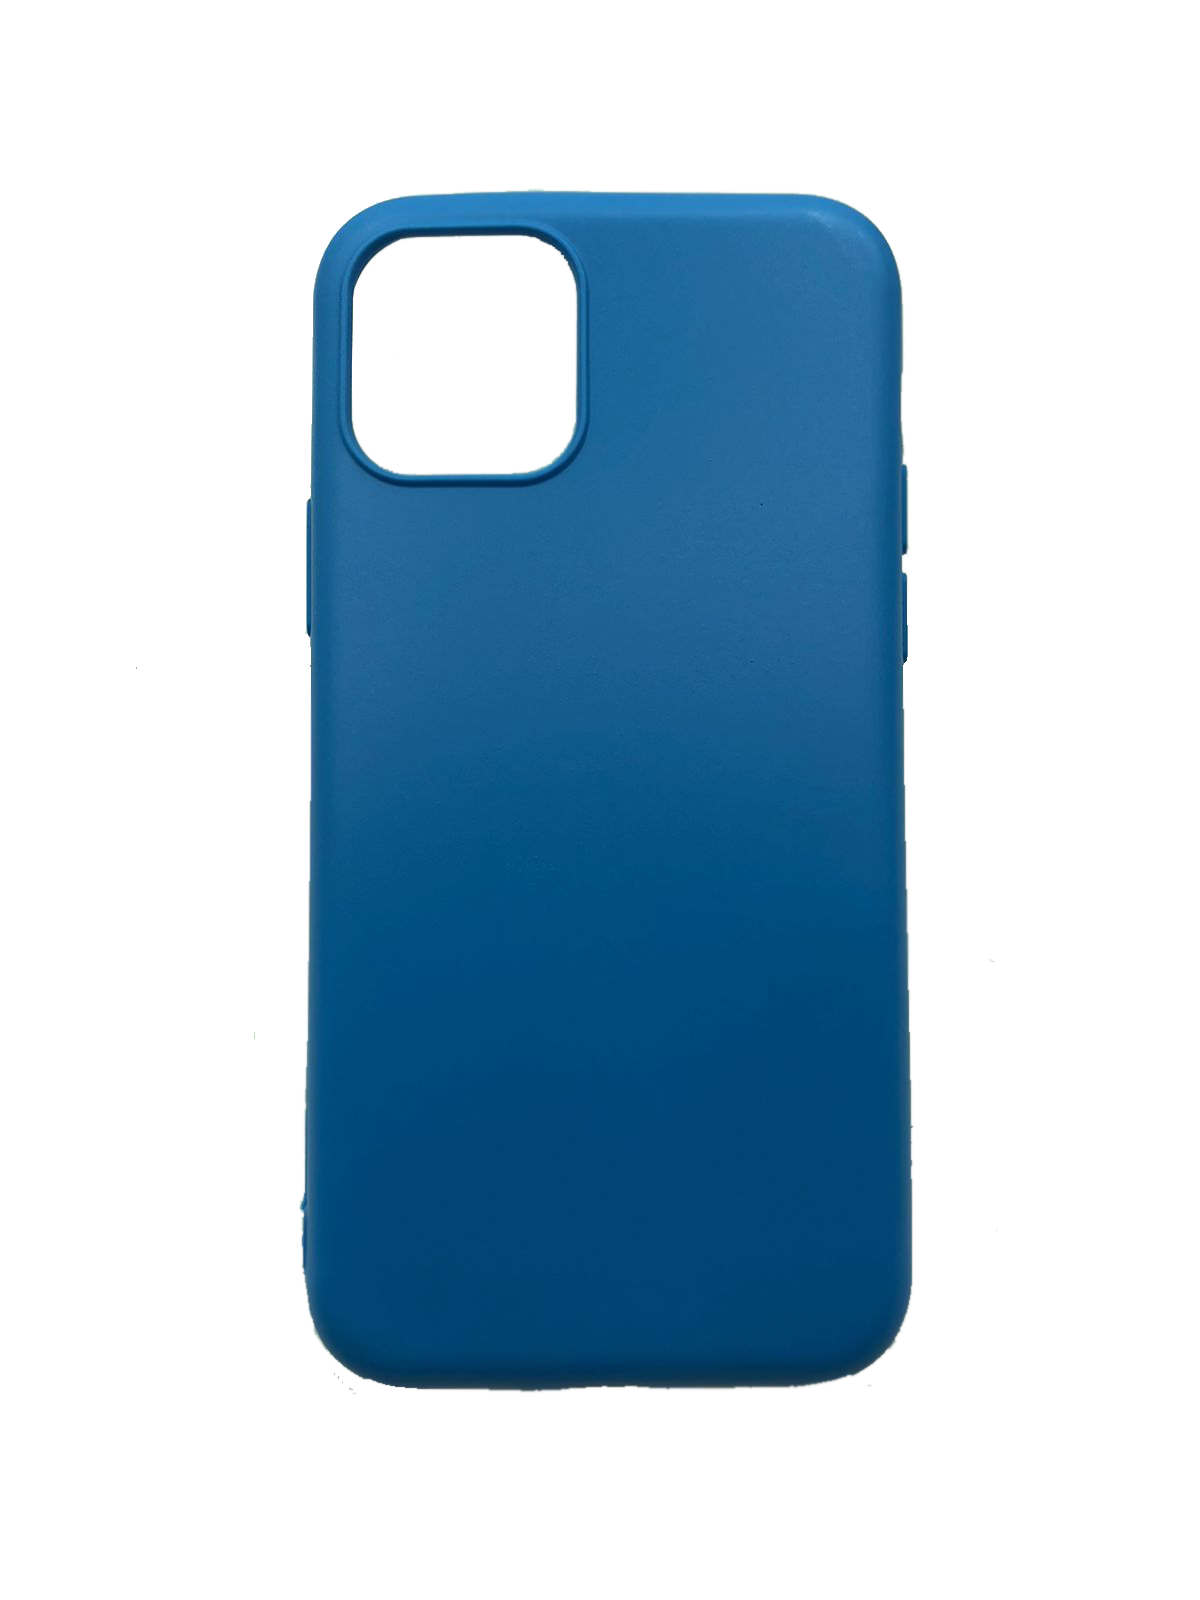 Silicone Case iPHONE 11 PRO BLUE